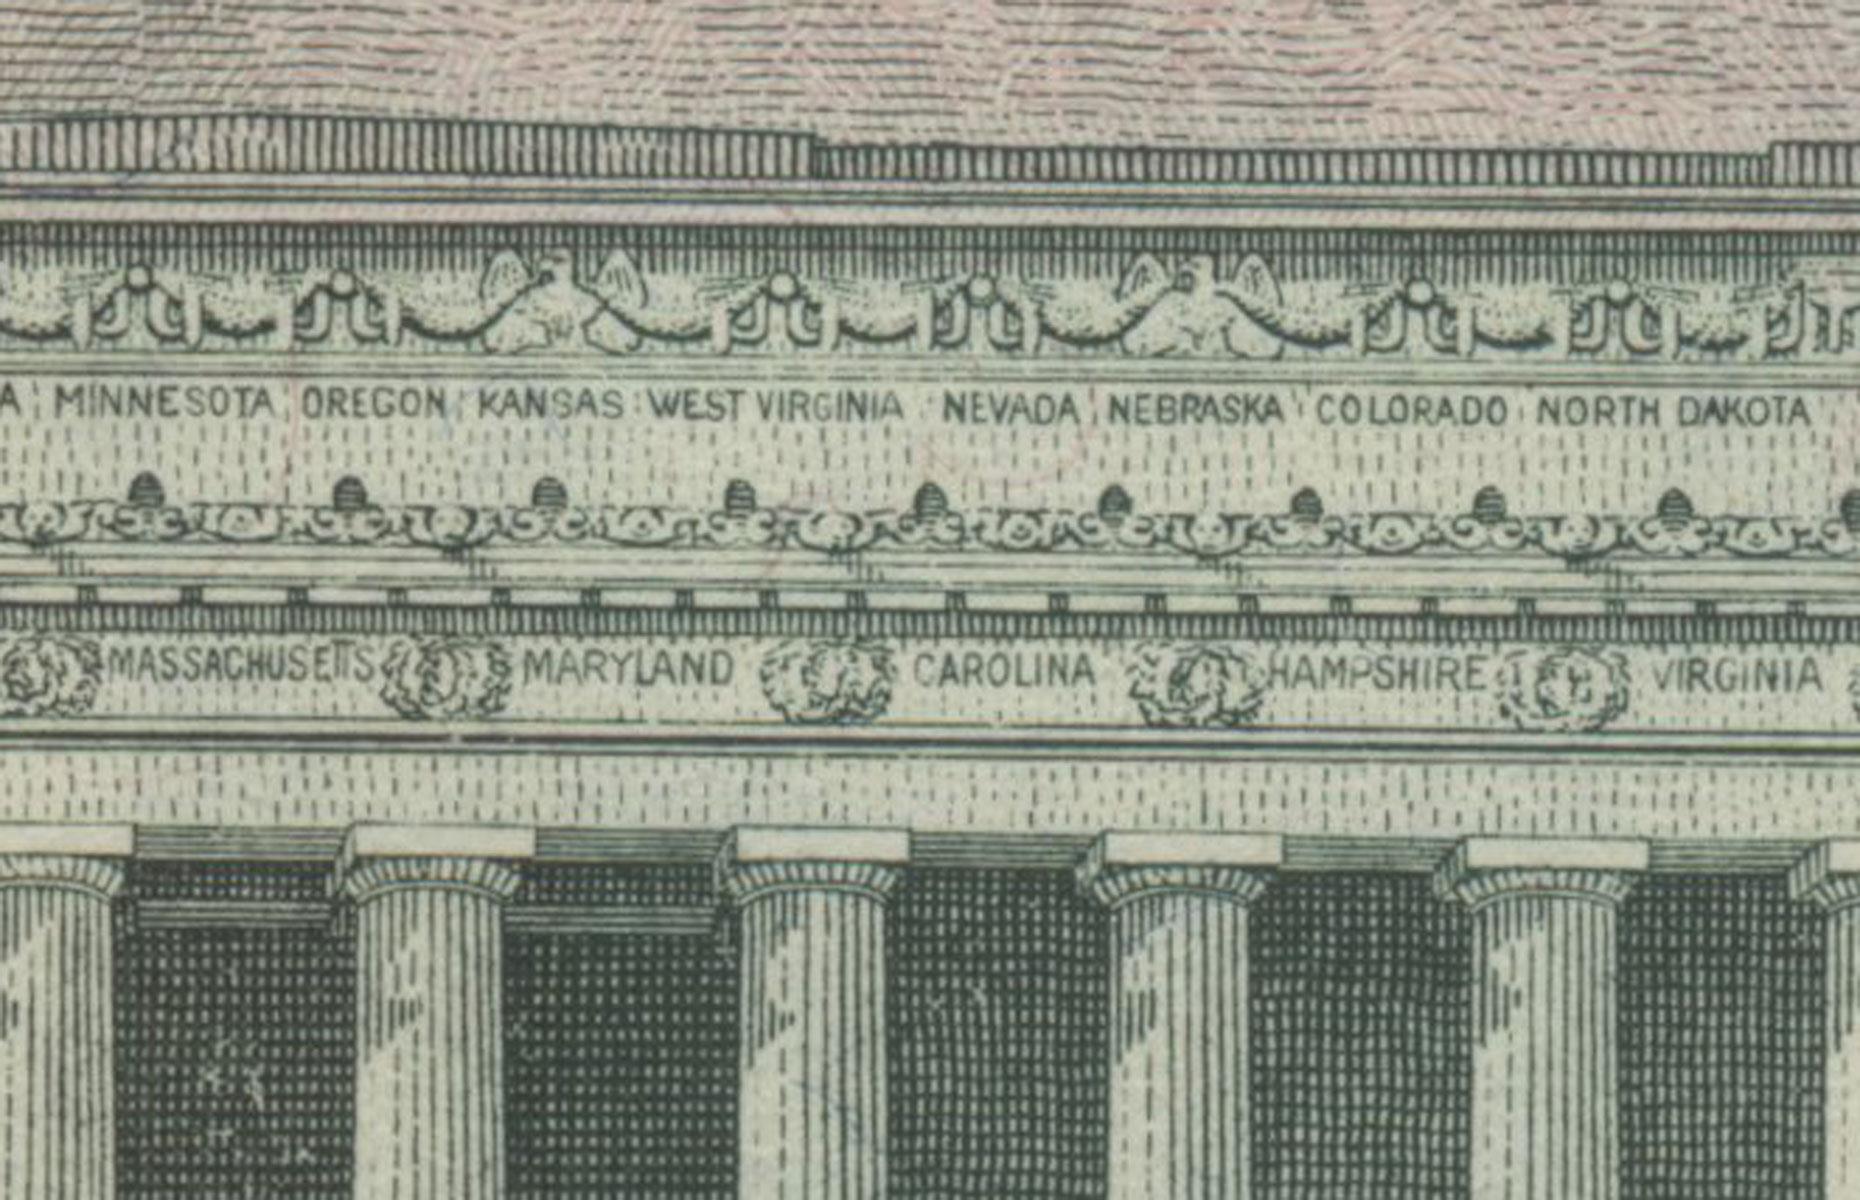 US $5 bill: state names